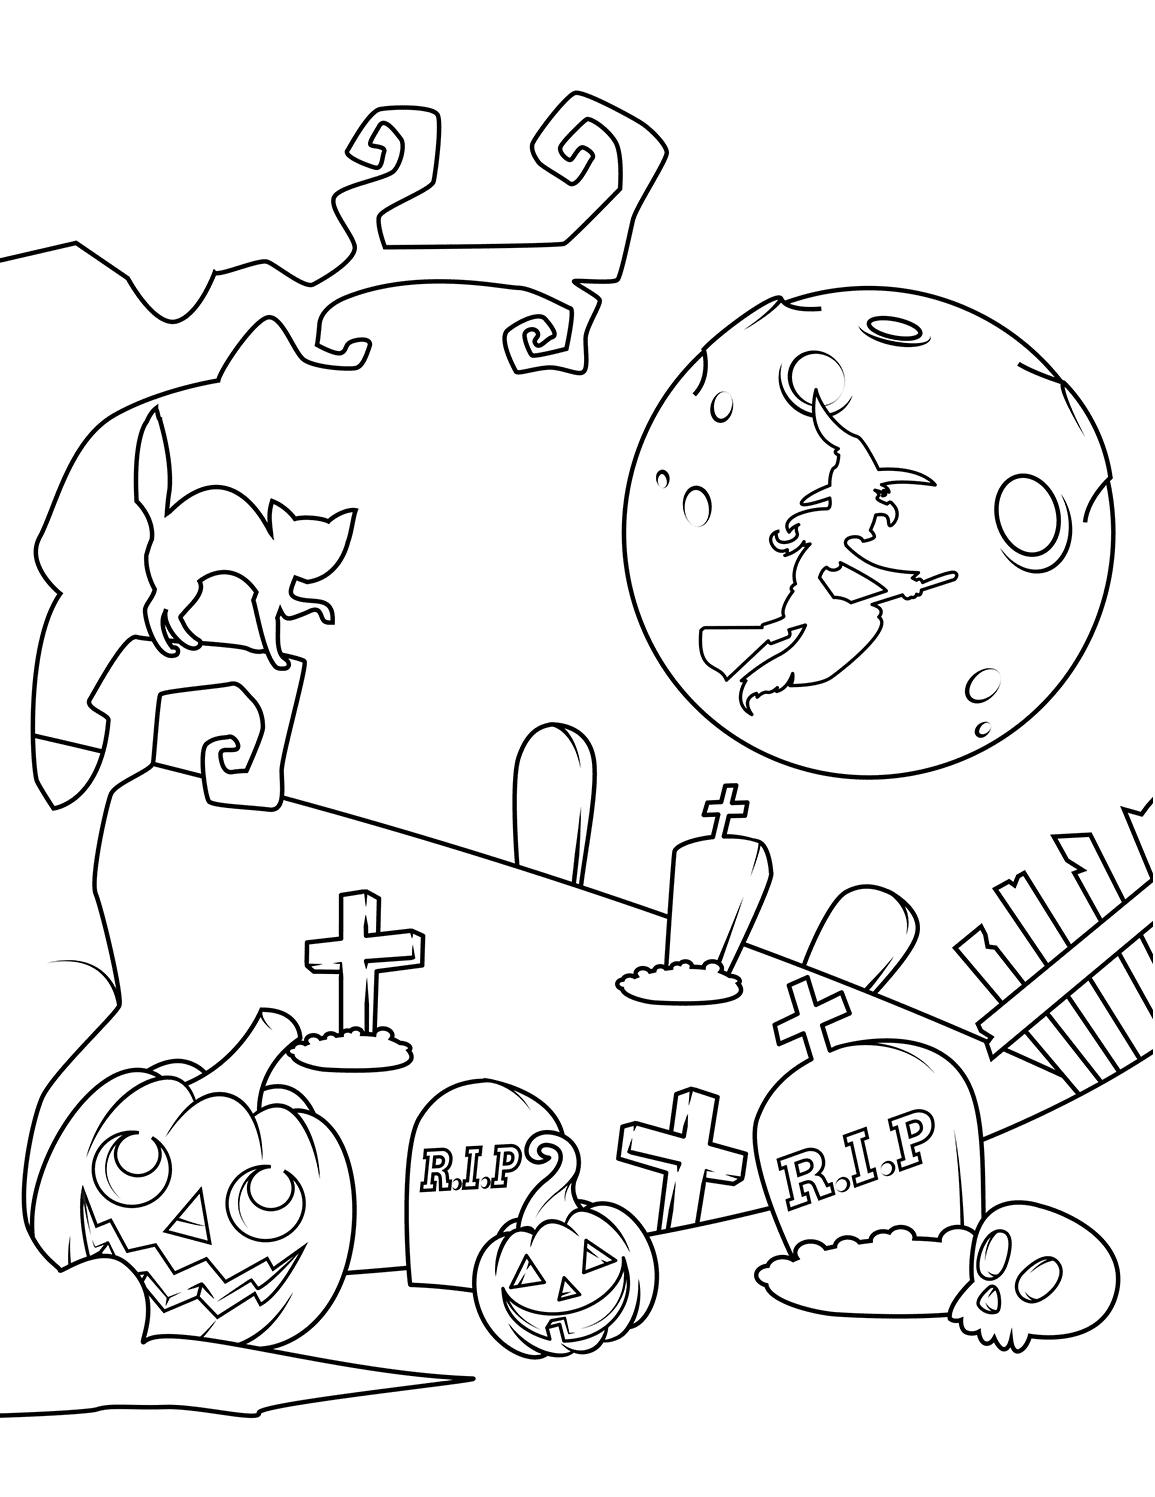 Cemetery With Jack O Lanterns Halloween Coloring Page